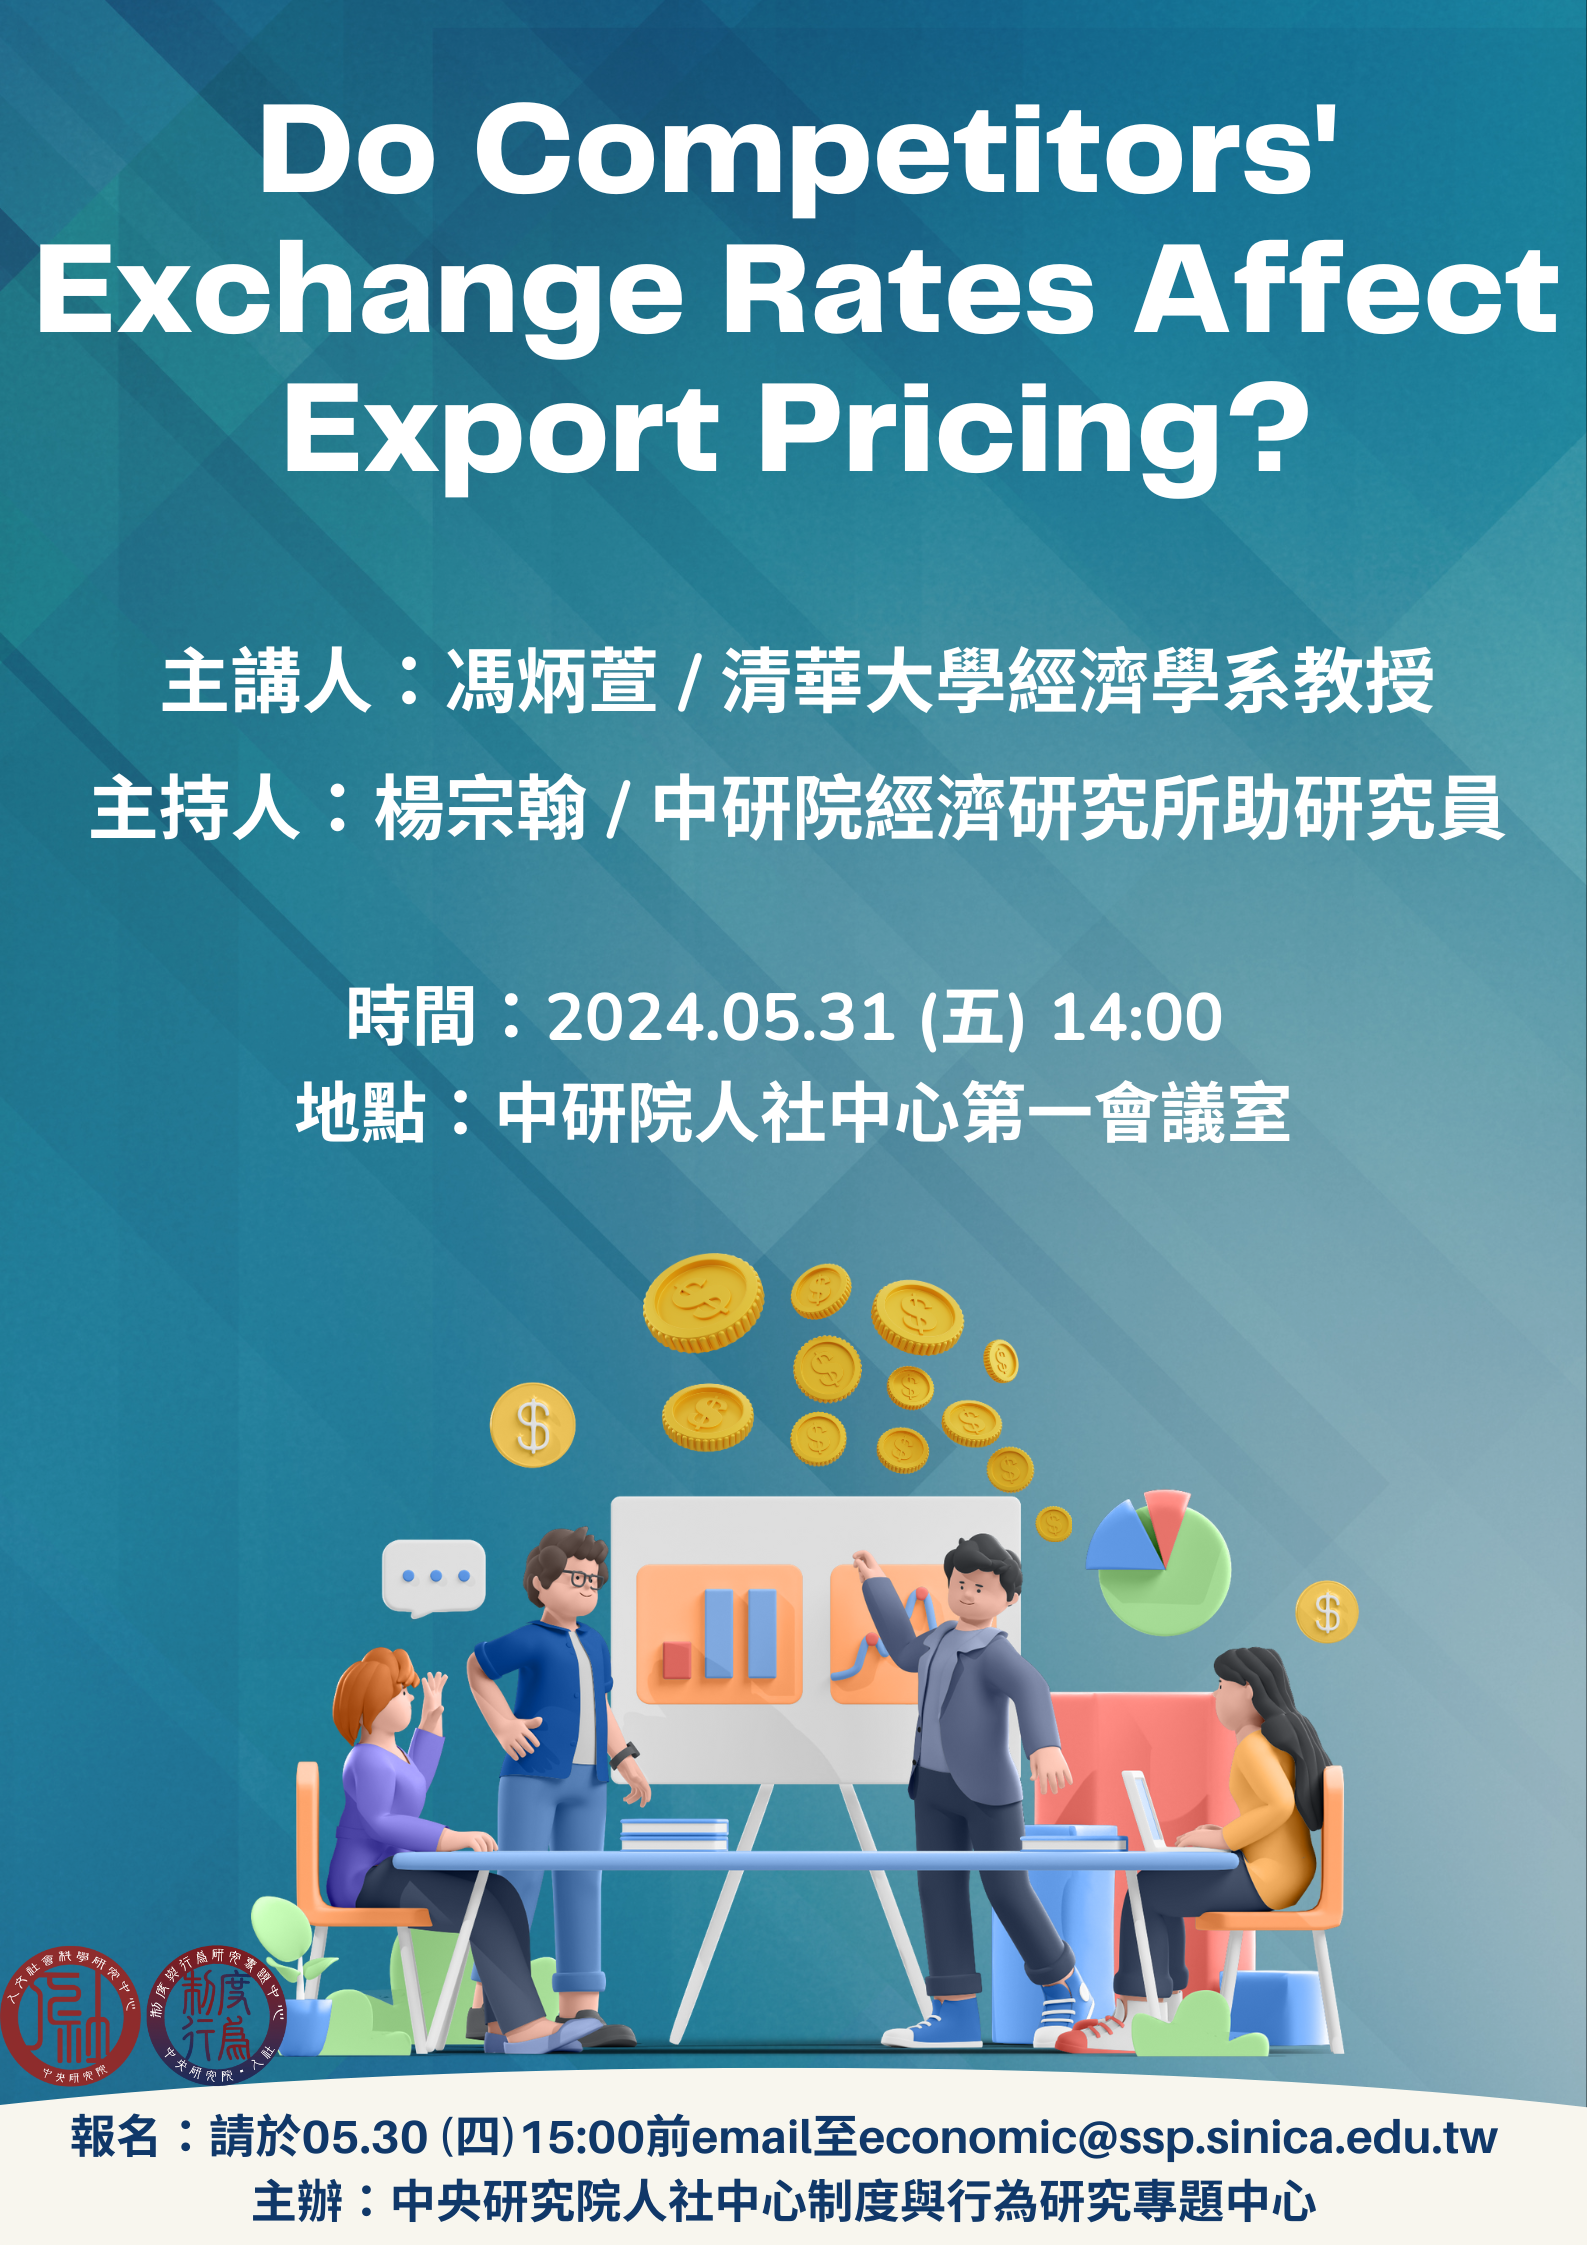 Do Competitors' Exchange Rates Affect Export Pricing?